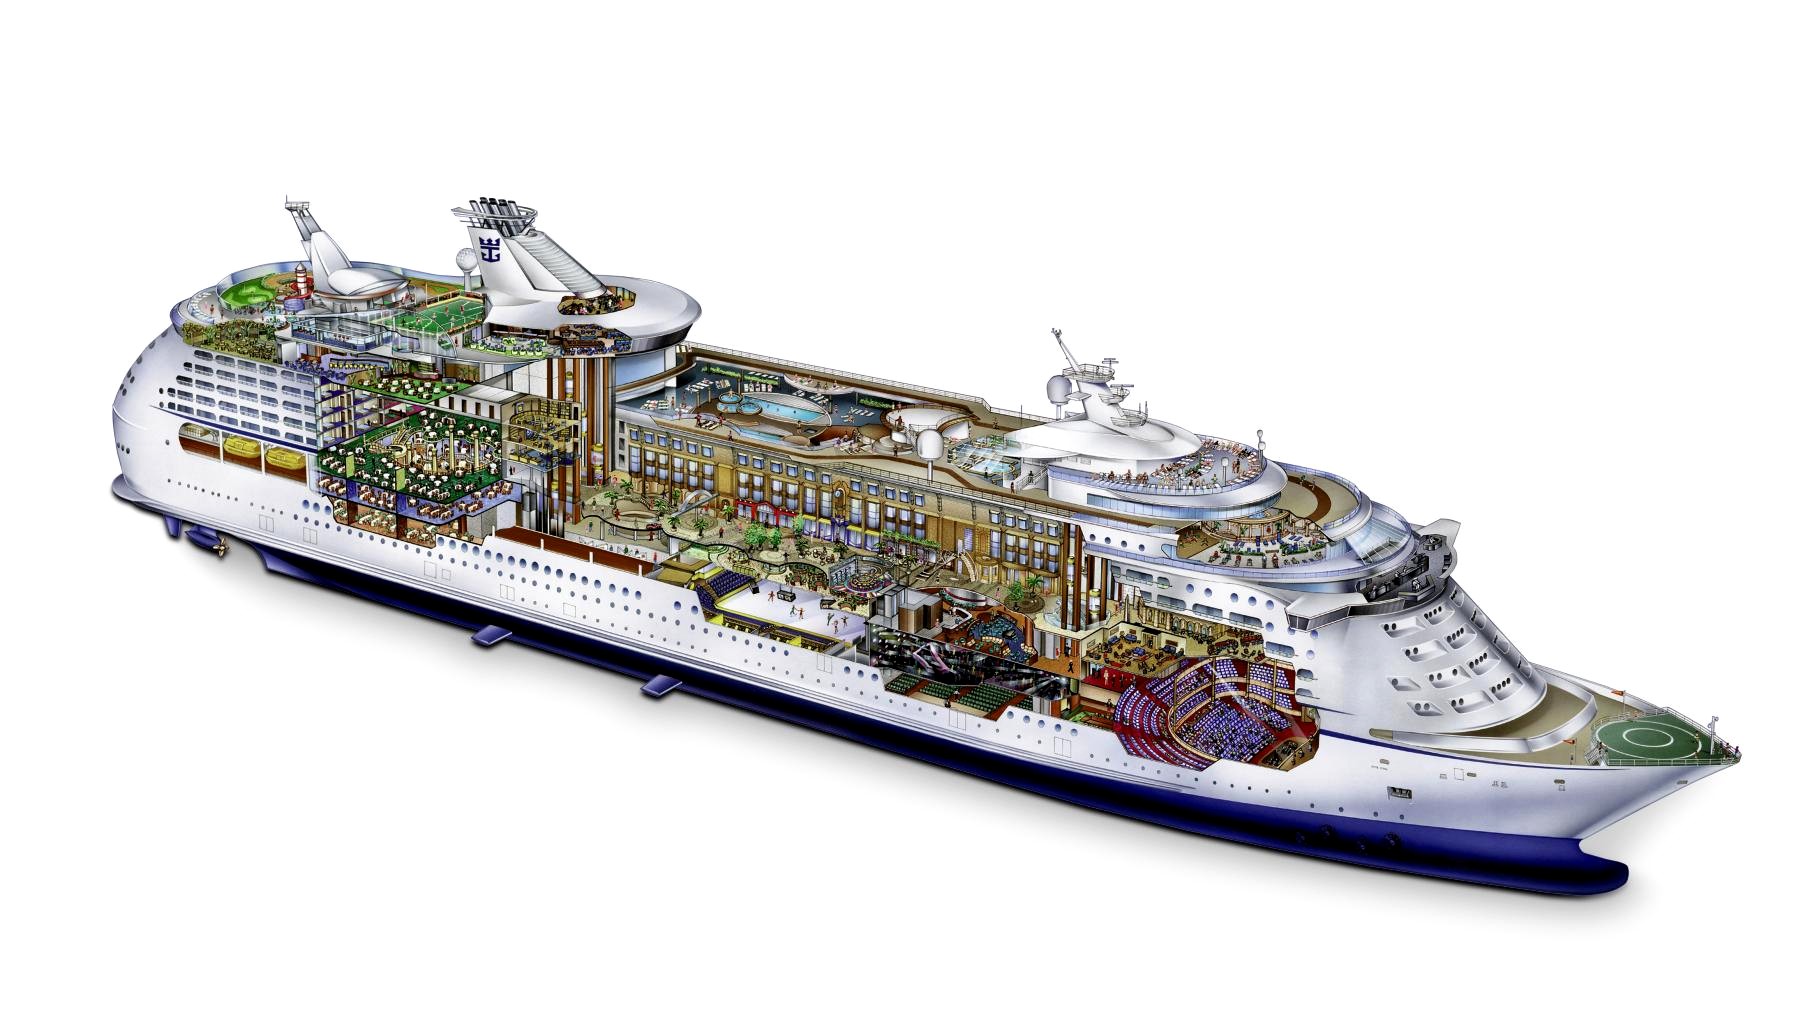 The Voyager of the Seas illustrated